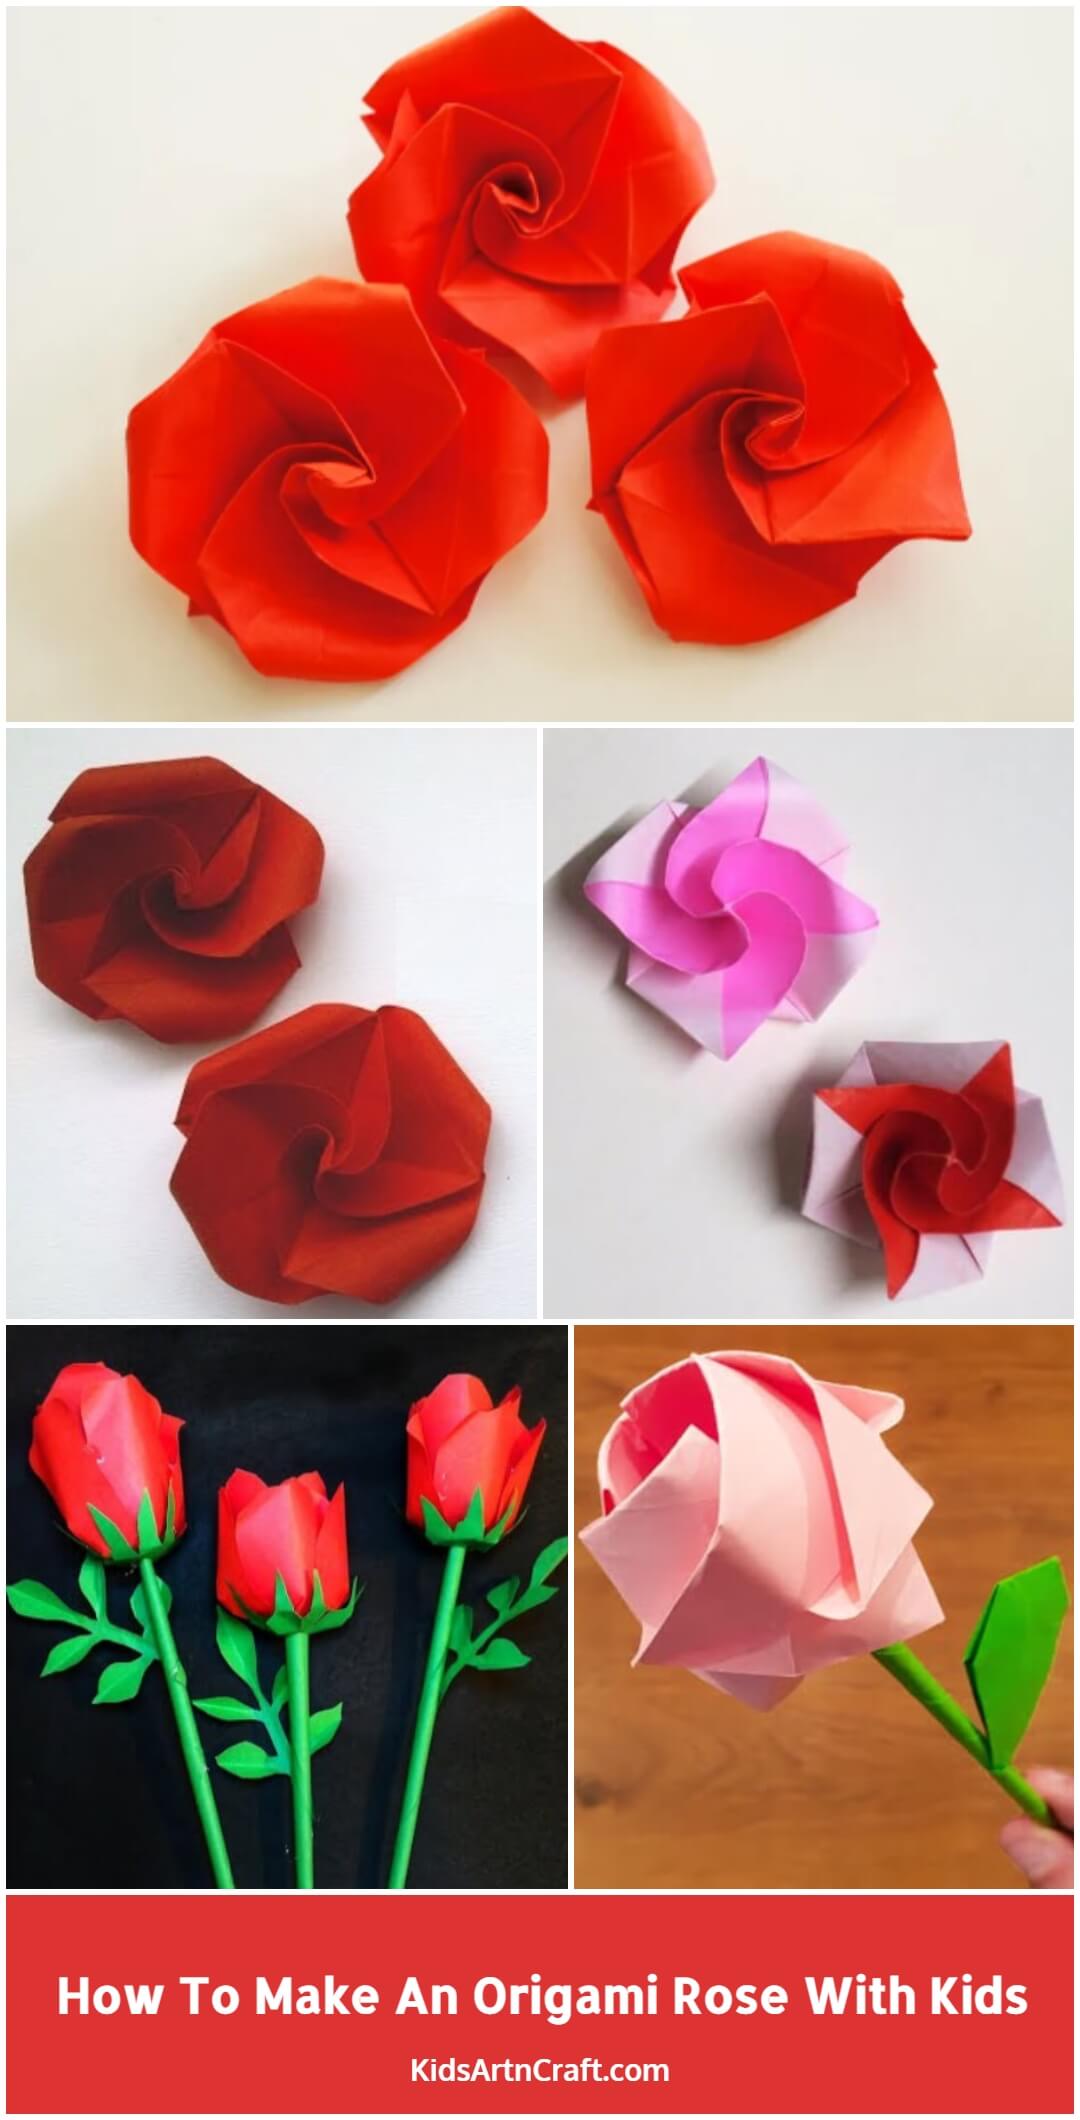 How To Make An Origami Rose With Kids